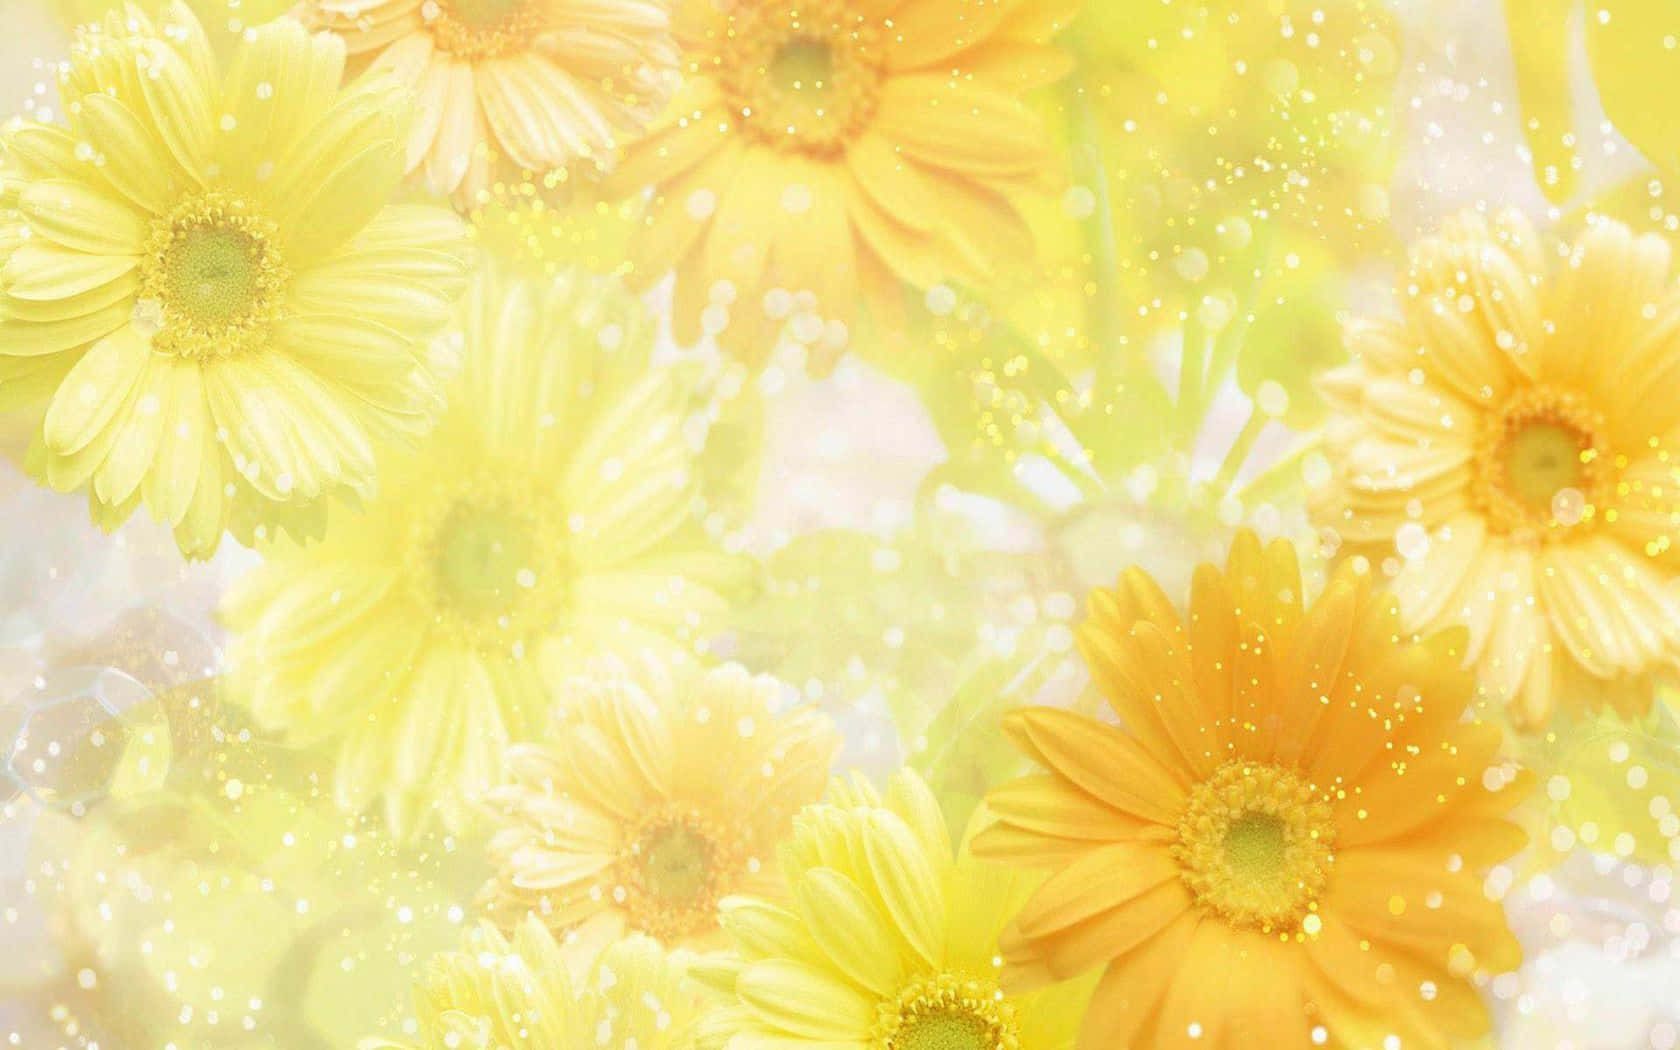 Brighten Up Your Desktop With A Cheery Bed of Spring Flowers Wallpaper